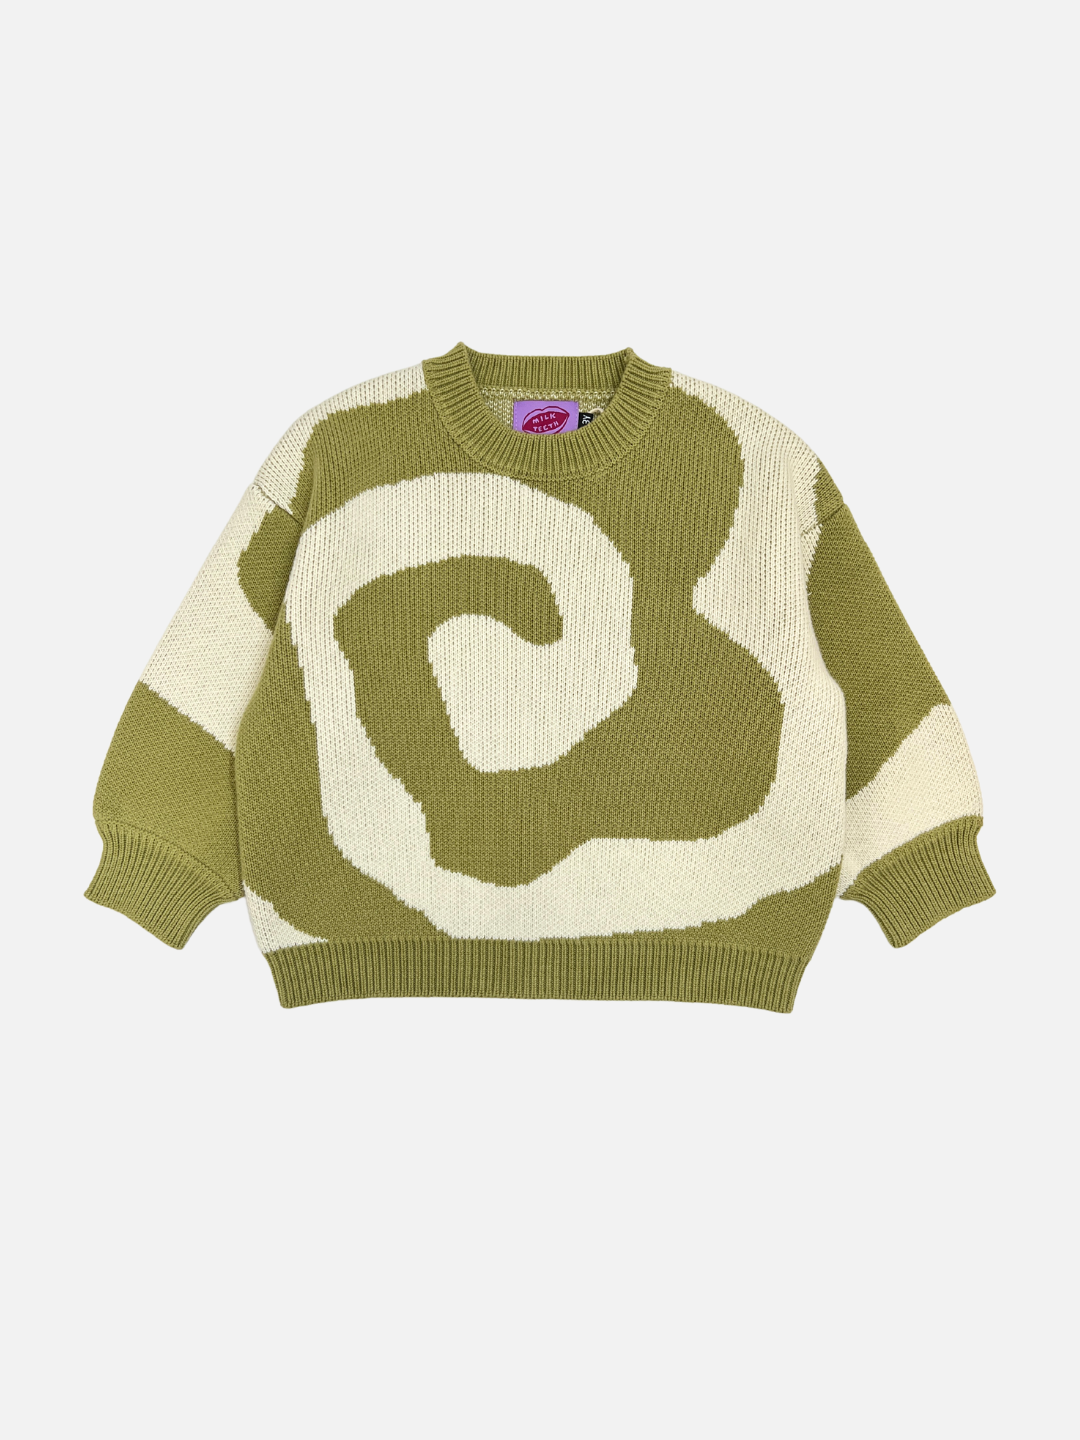 Sage | Front view of kids crewneck sweater in sage green, with a large single cream swirl design that covers the entire sweater.